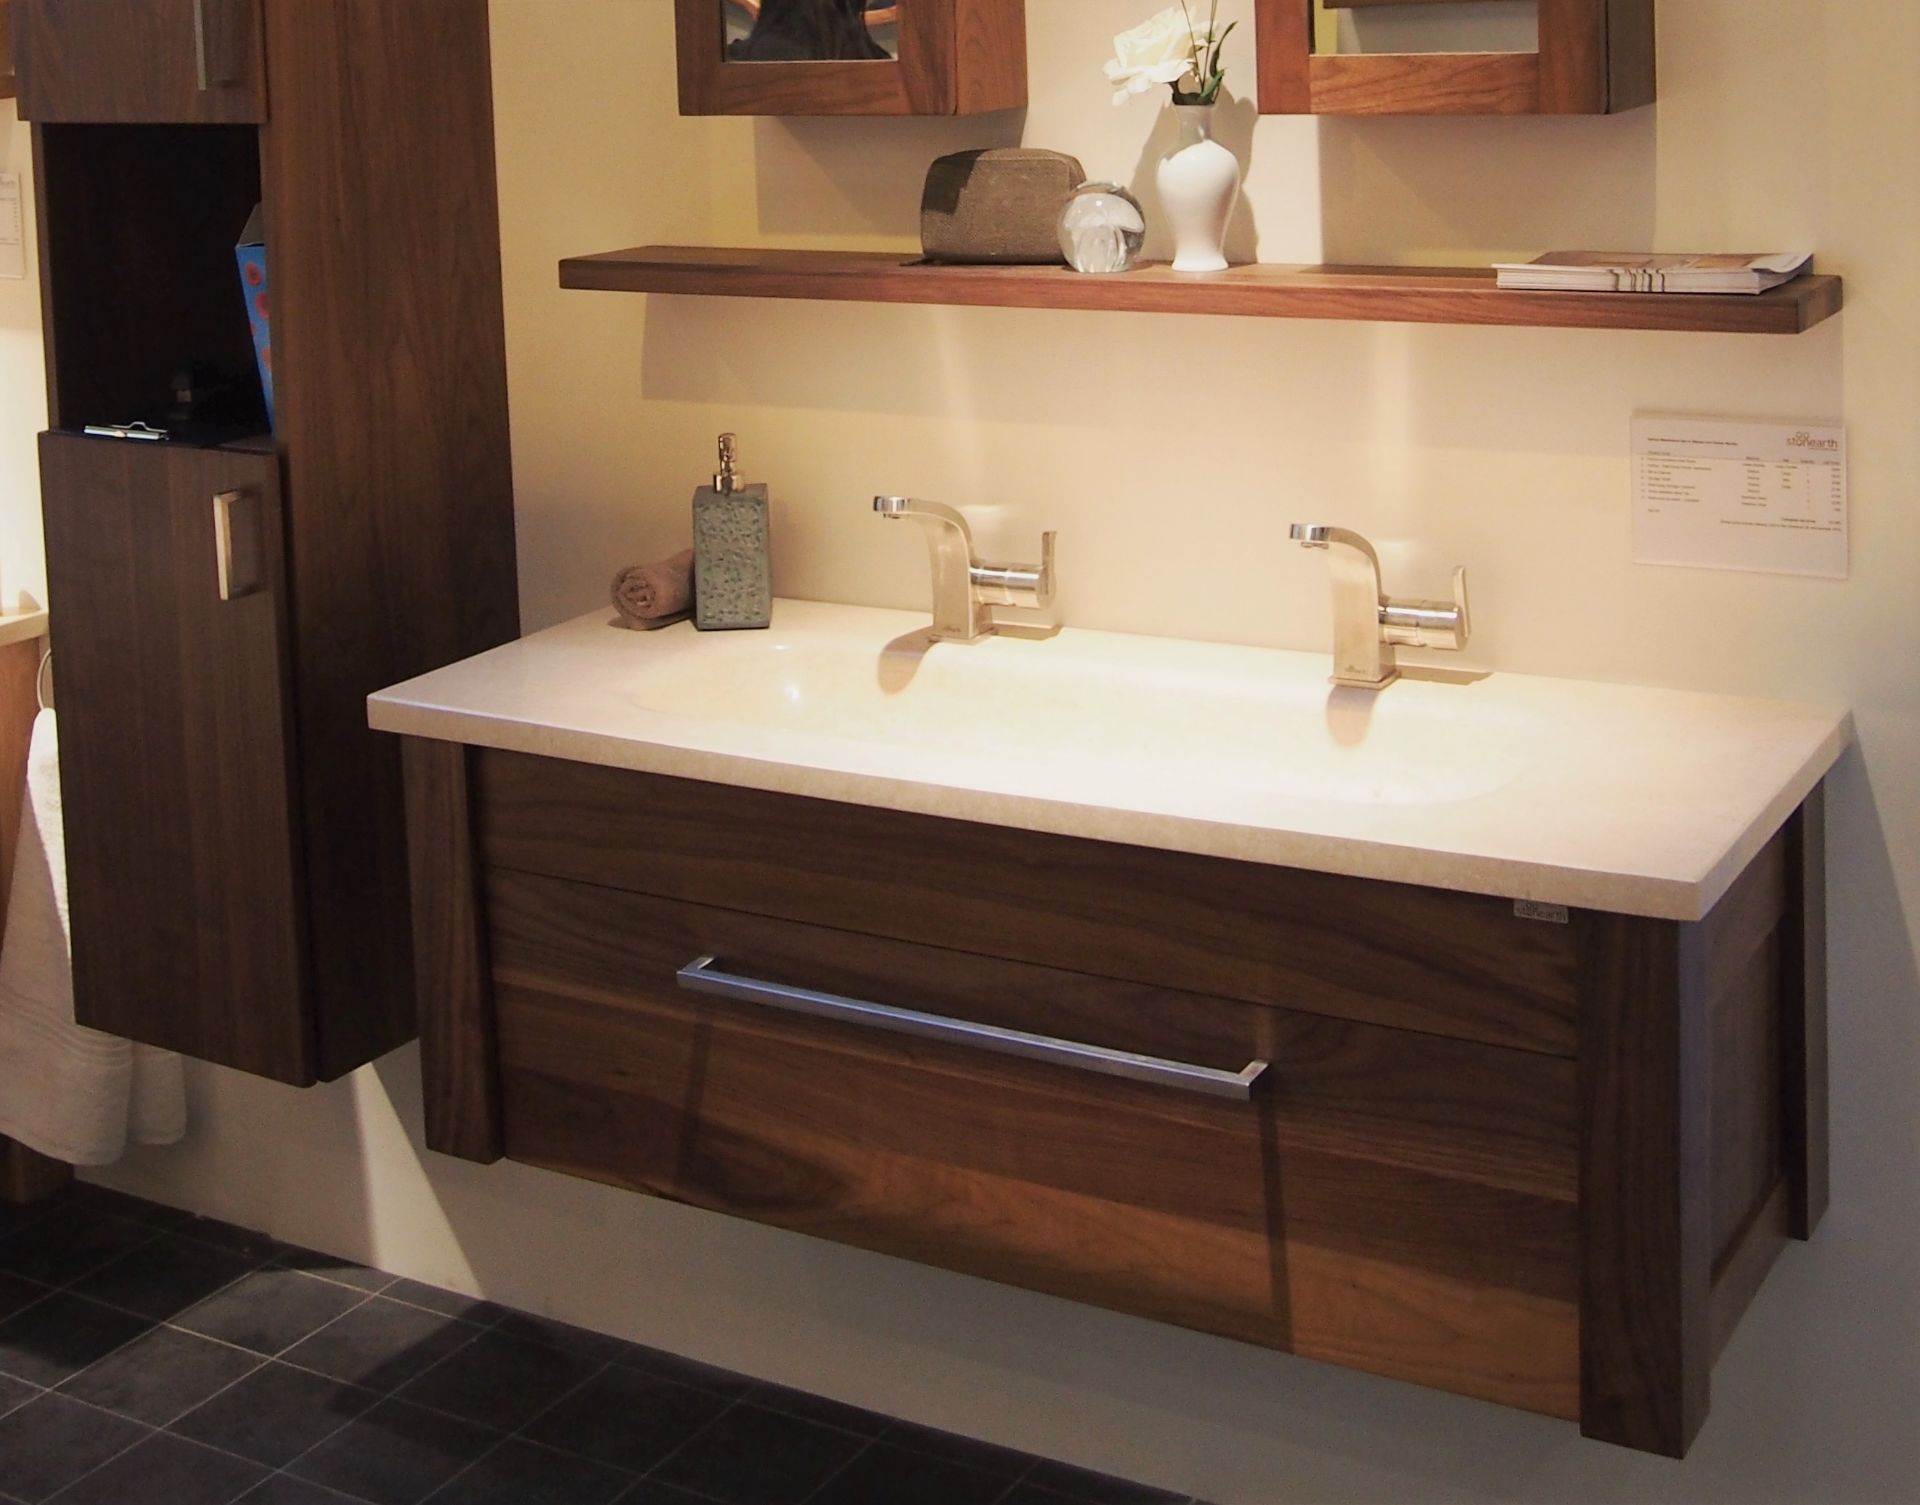 1 x Stonearth 'Venice' Wall Mounted 1200mm Washstand - American Solid Walnut - Original RRP £1,270 - Image 9 of 9